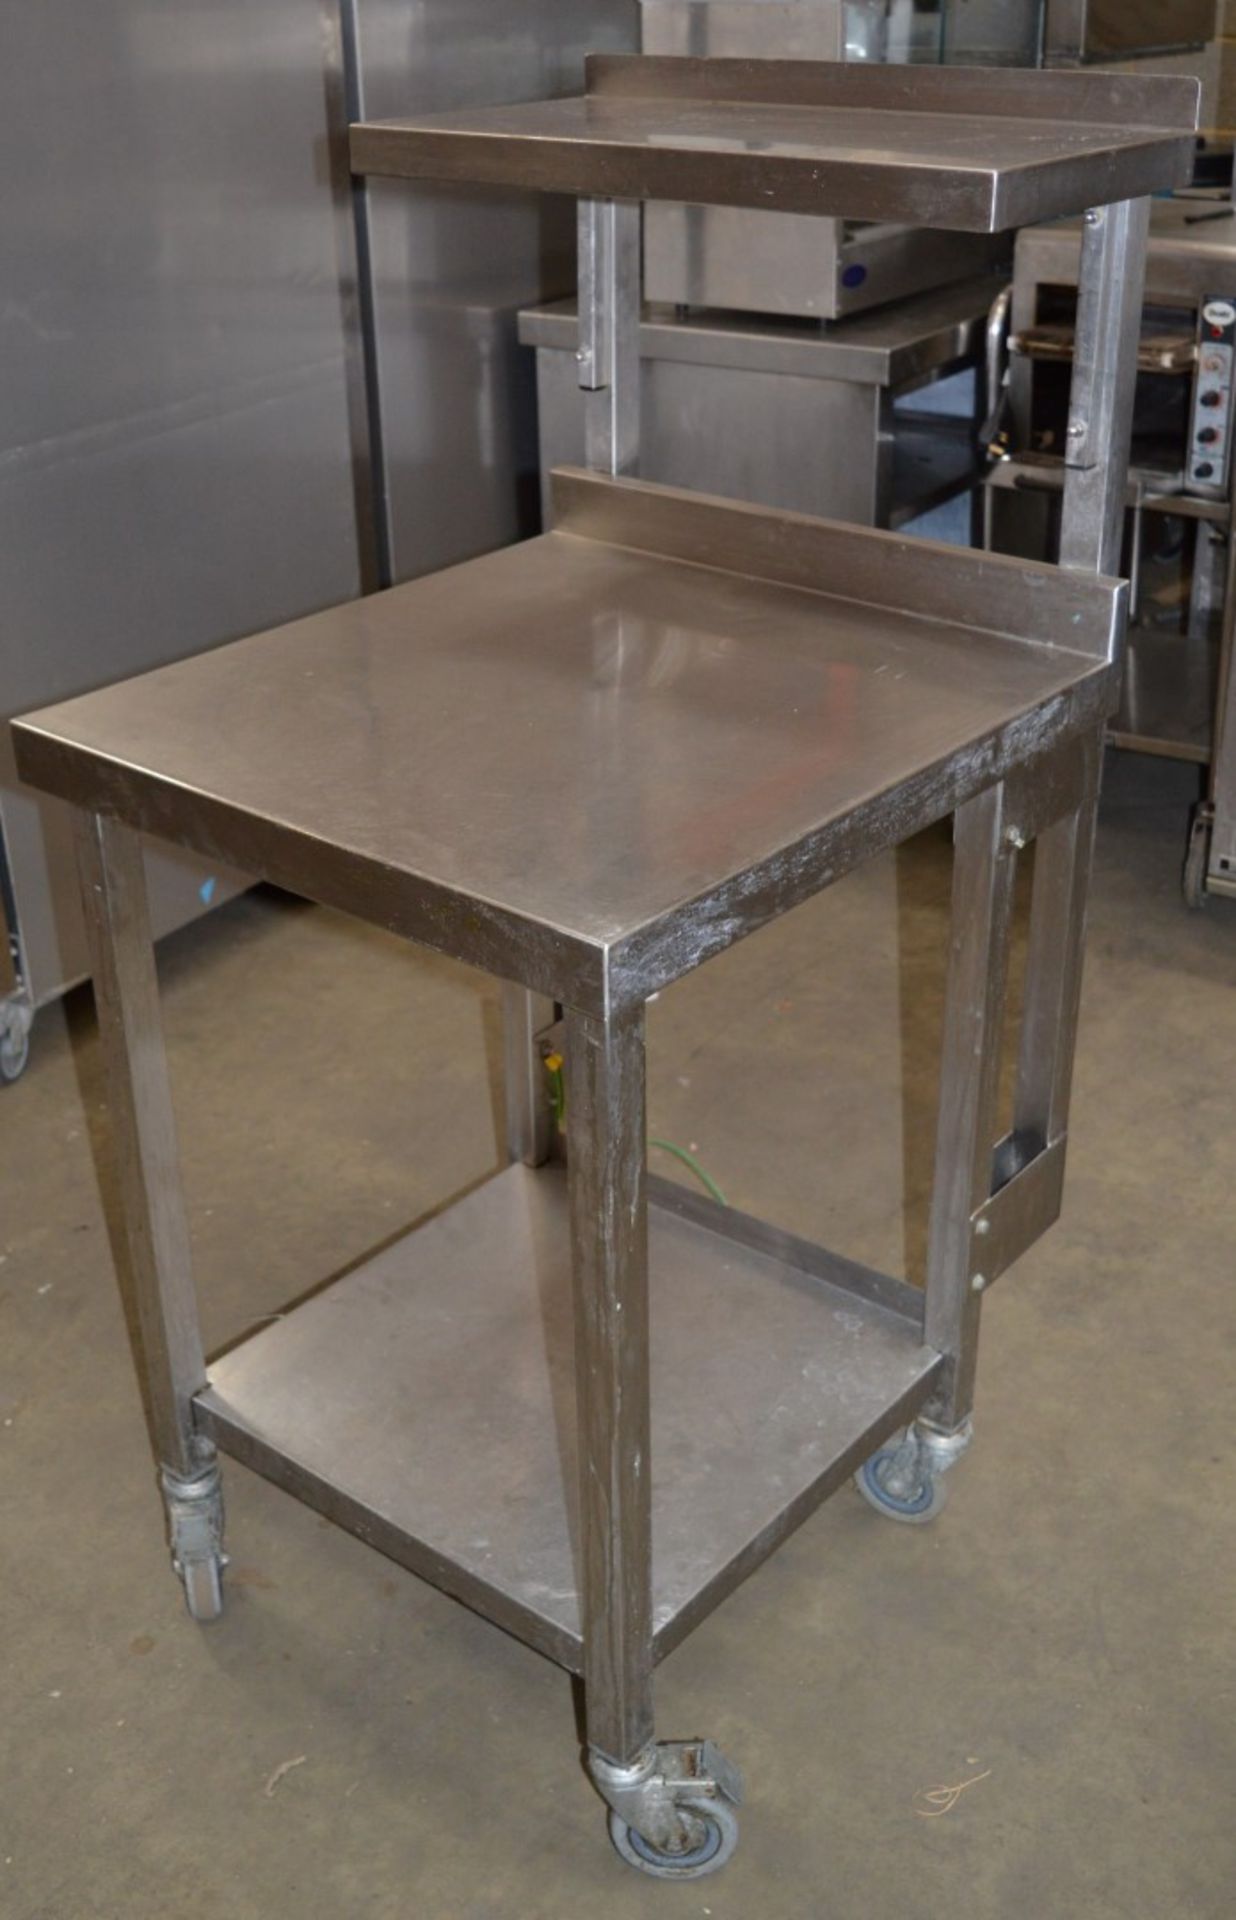 1 x Stainless Steel Commercial Catering Prep Bench on Castors With Under Shelf and Over Shelf - H131